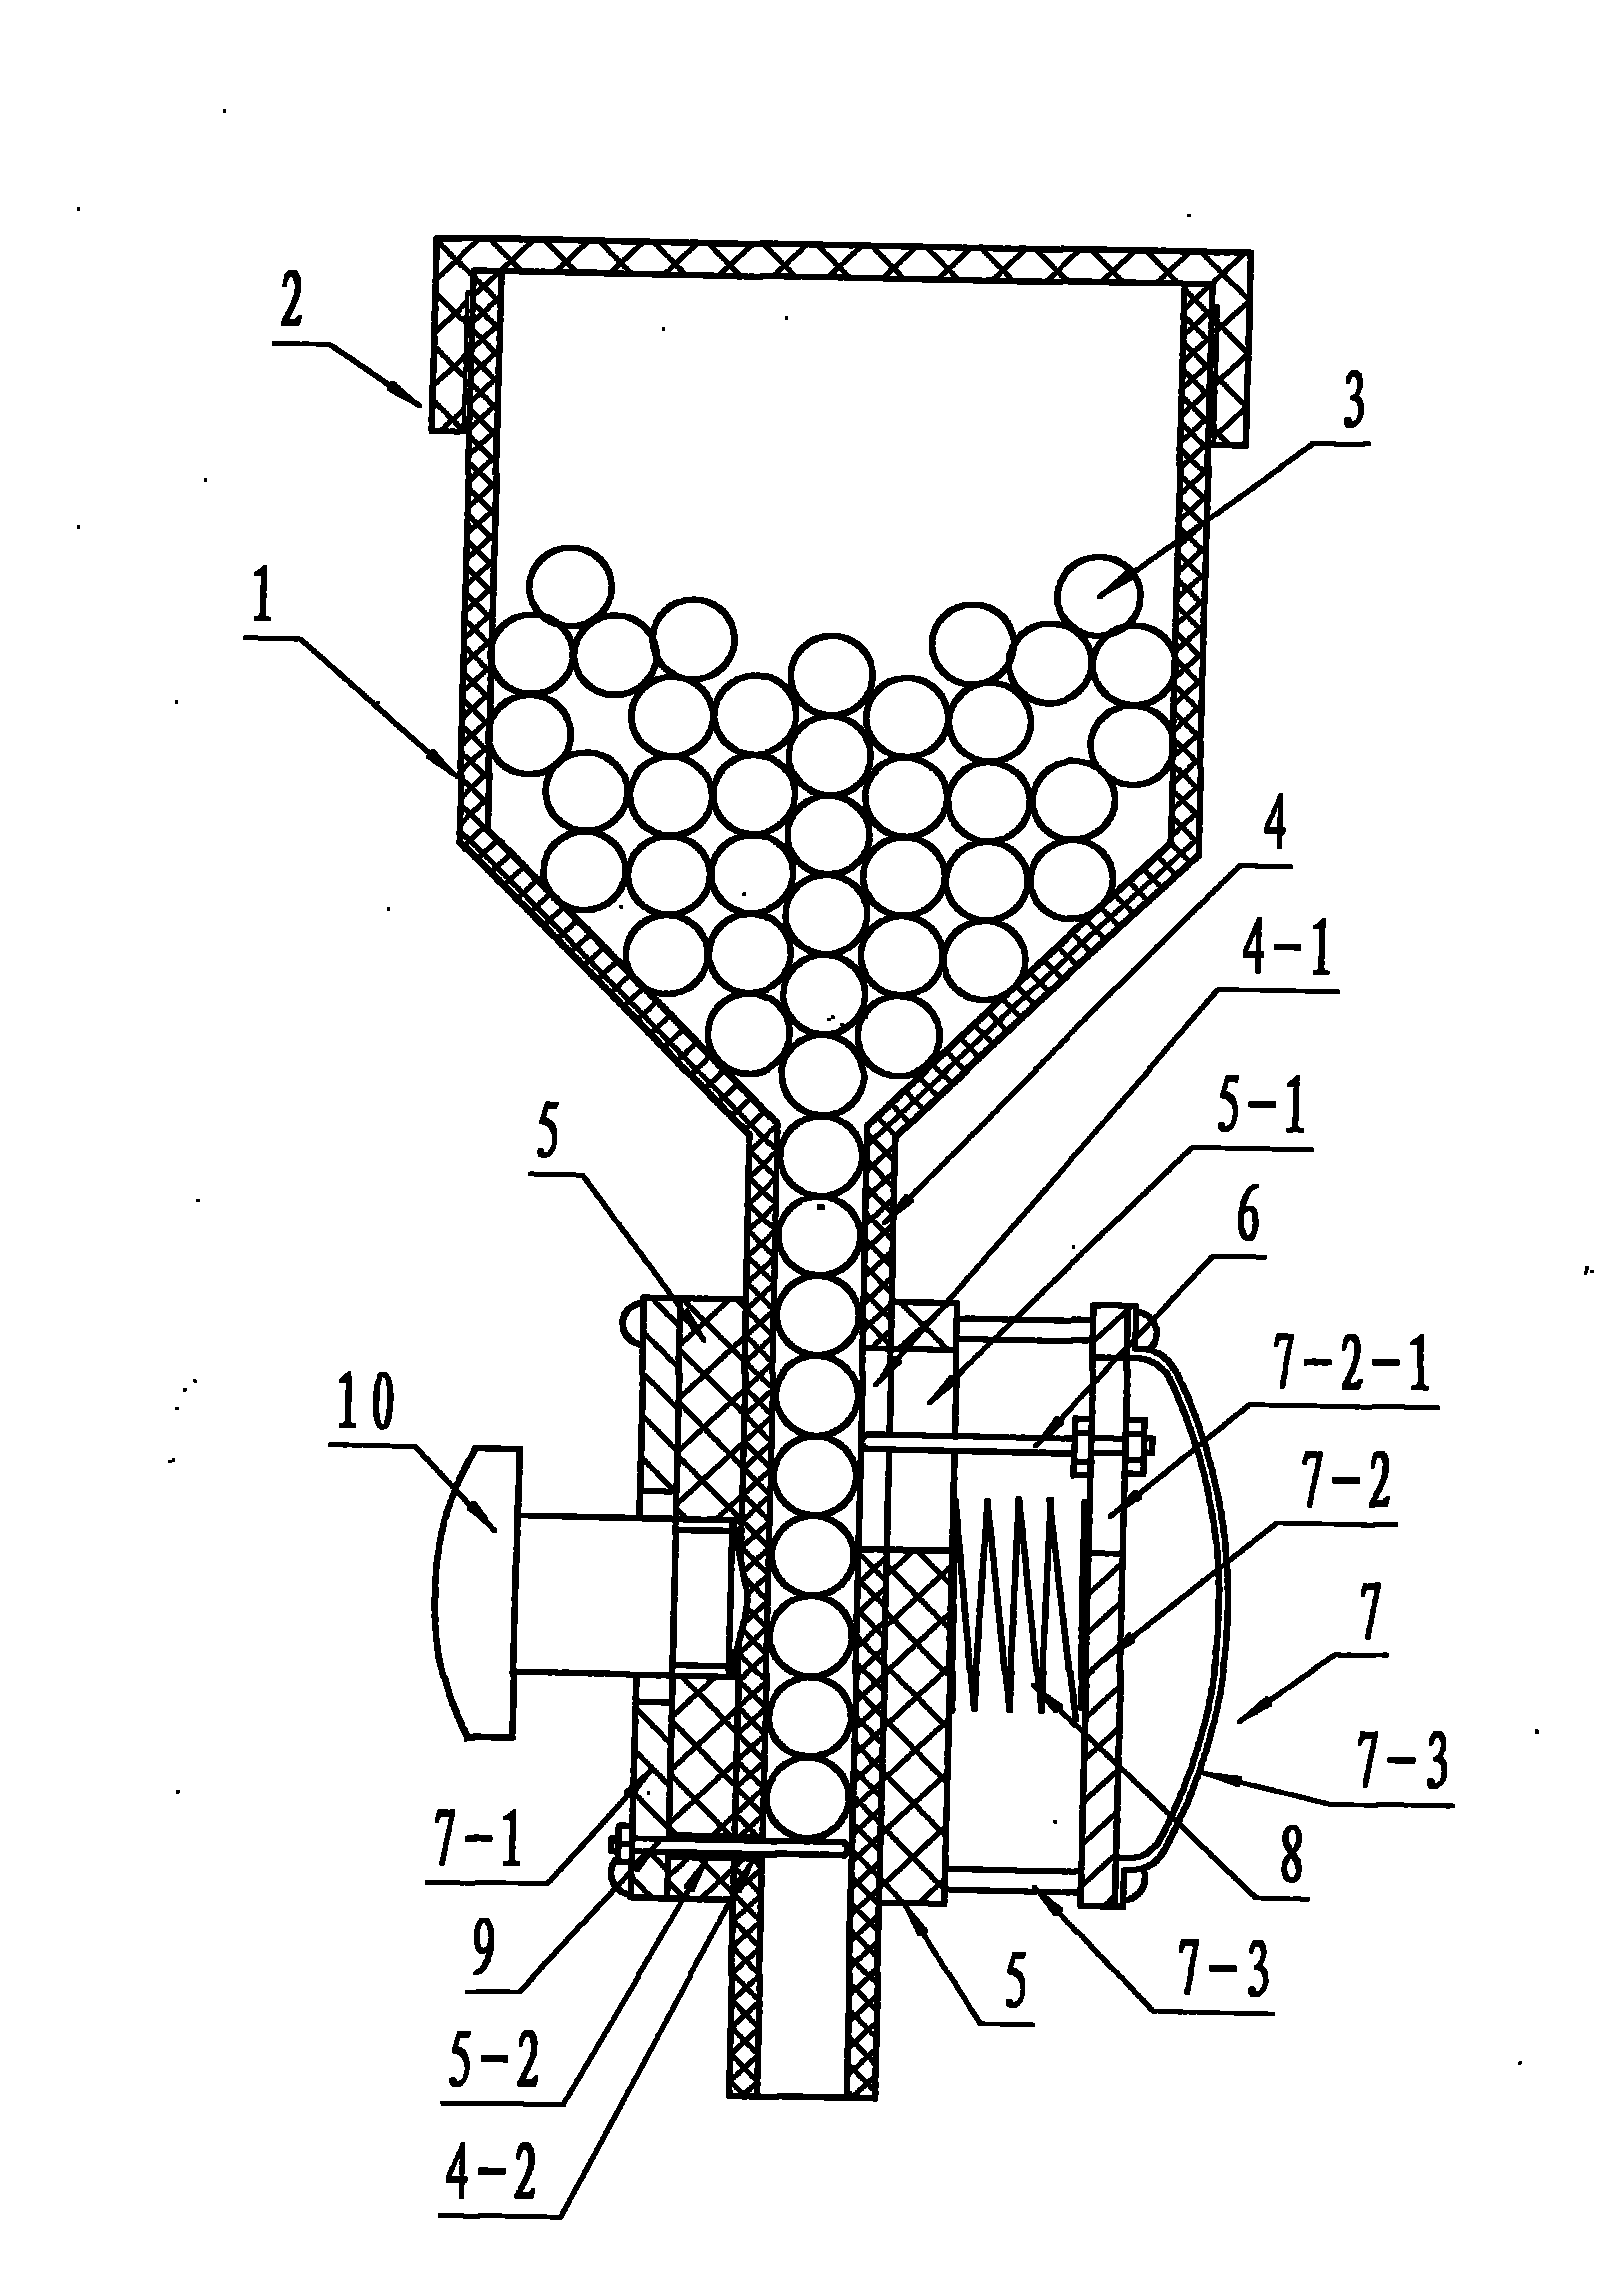 Quantification ball dripping device assembly